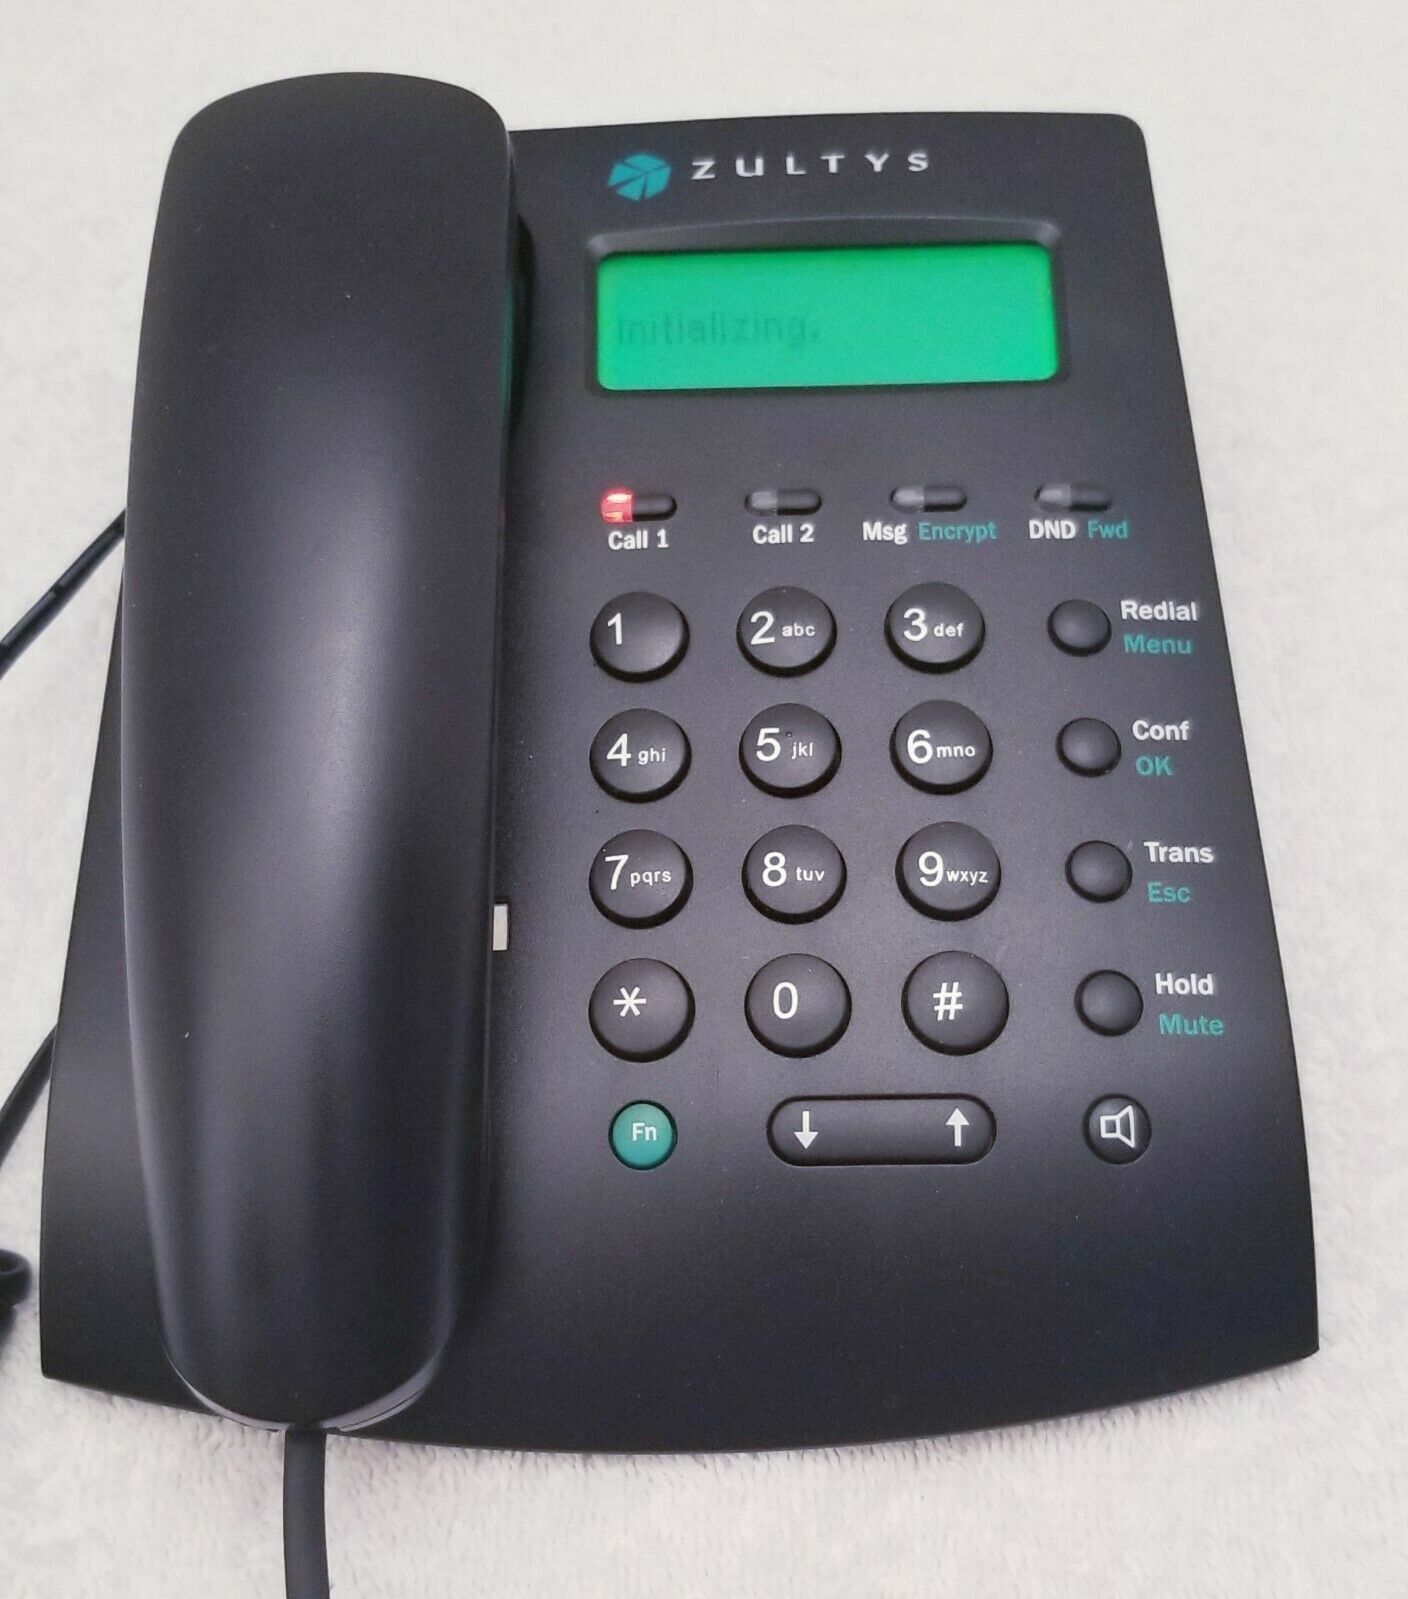 Zultys Zip 2x2 IP Phone with Power Supply Warranty Display MX30 VoIP Tested